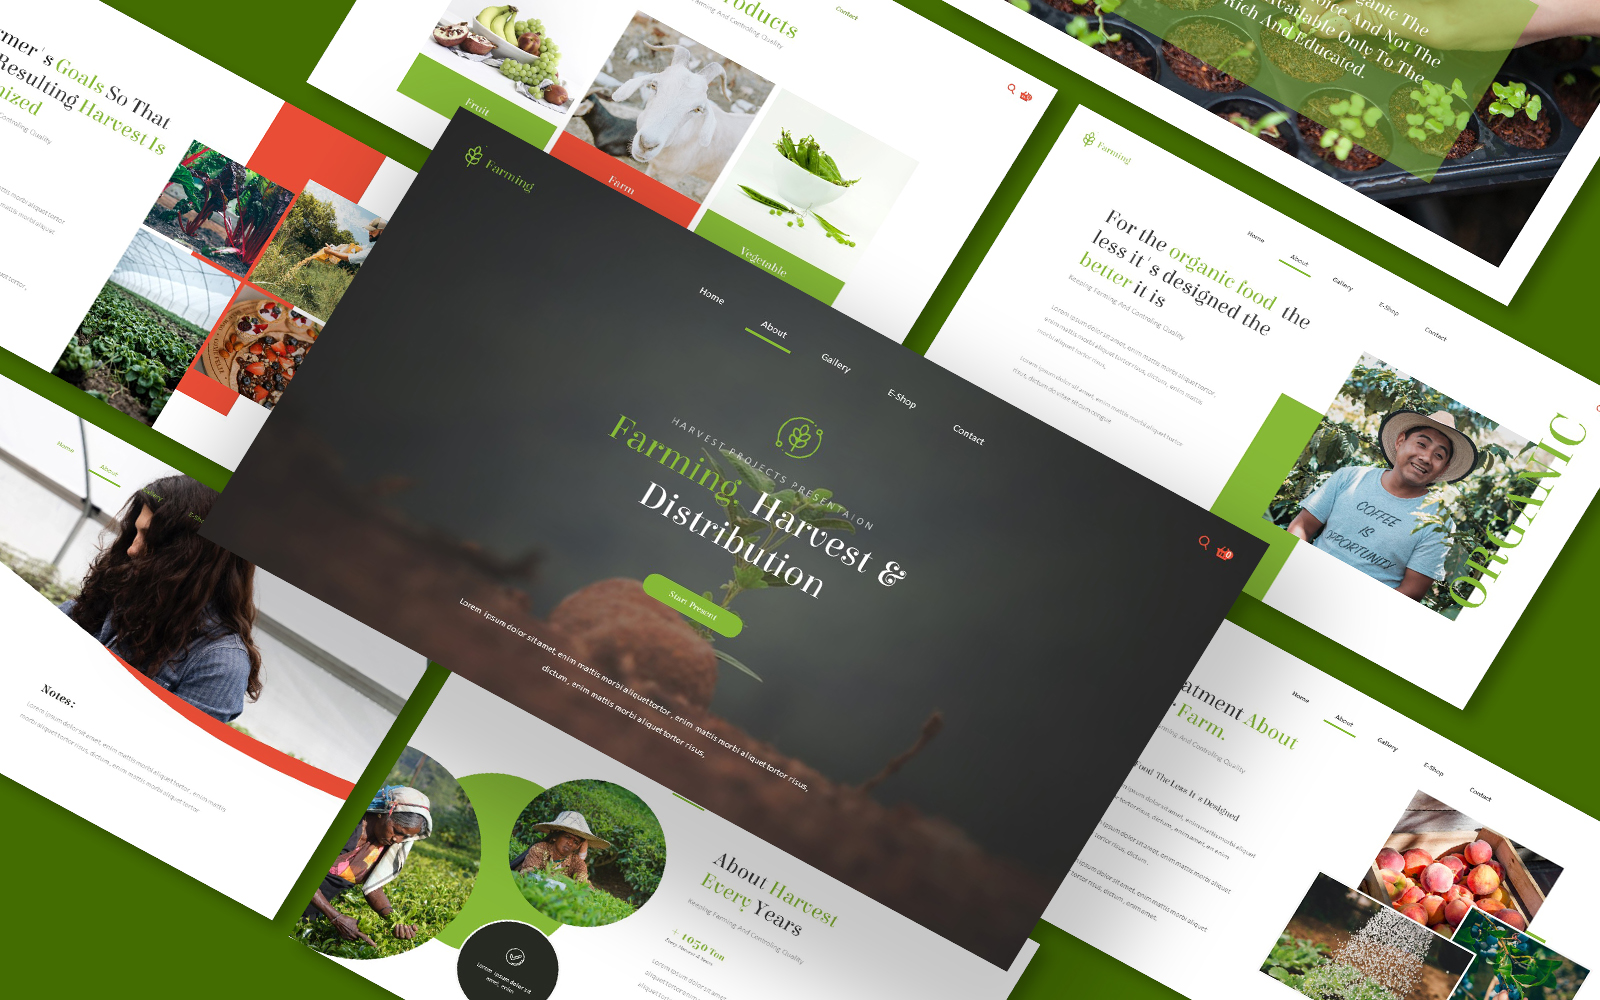 Farming & Distribution Powerpoint Template